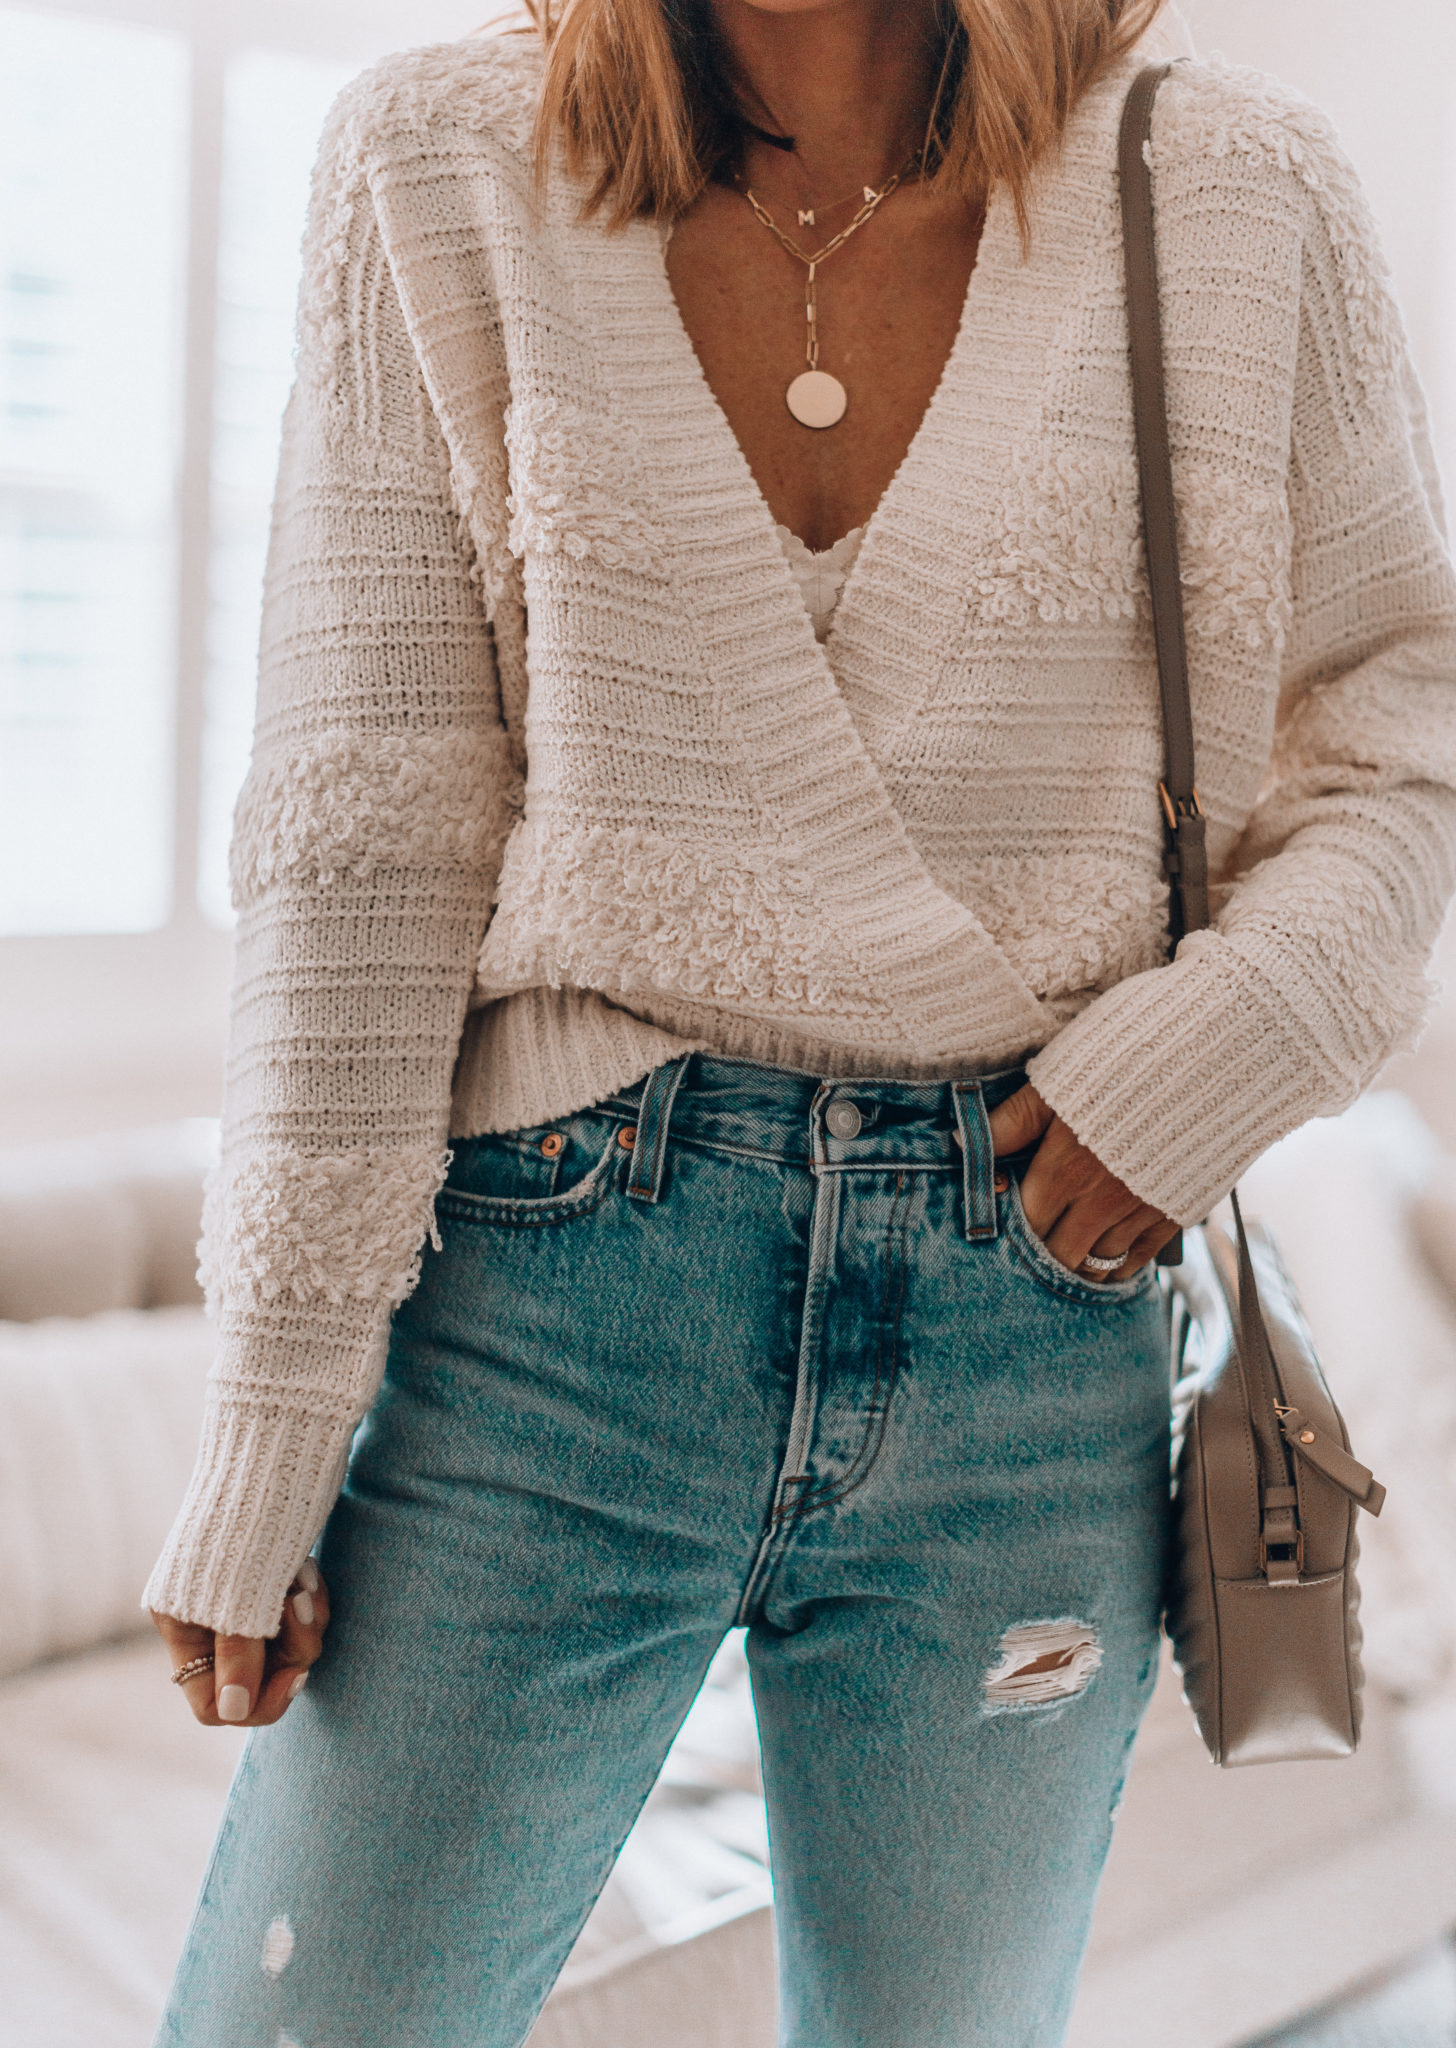 Outfits to Wear Now and Into Spring